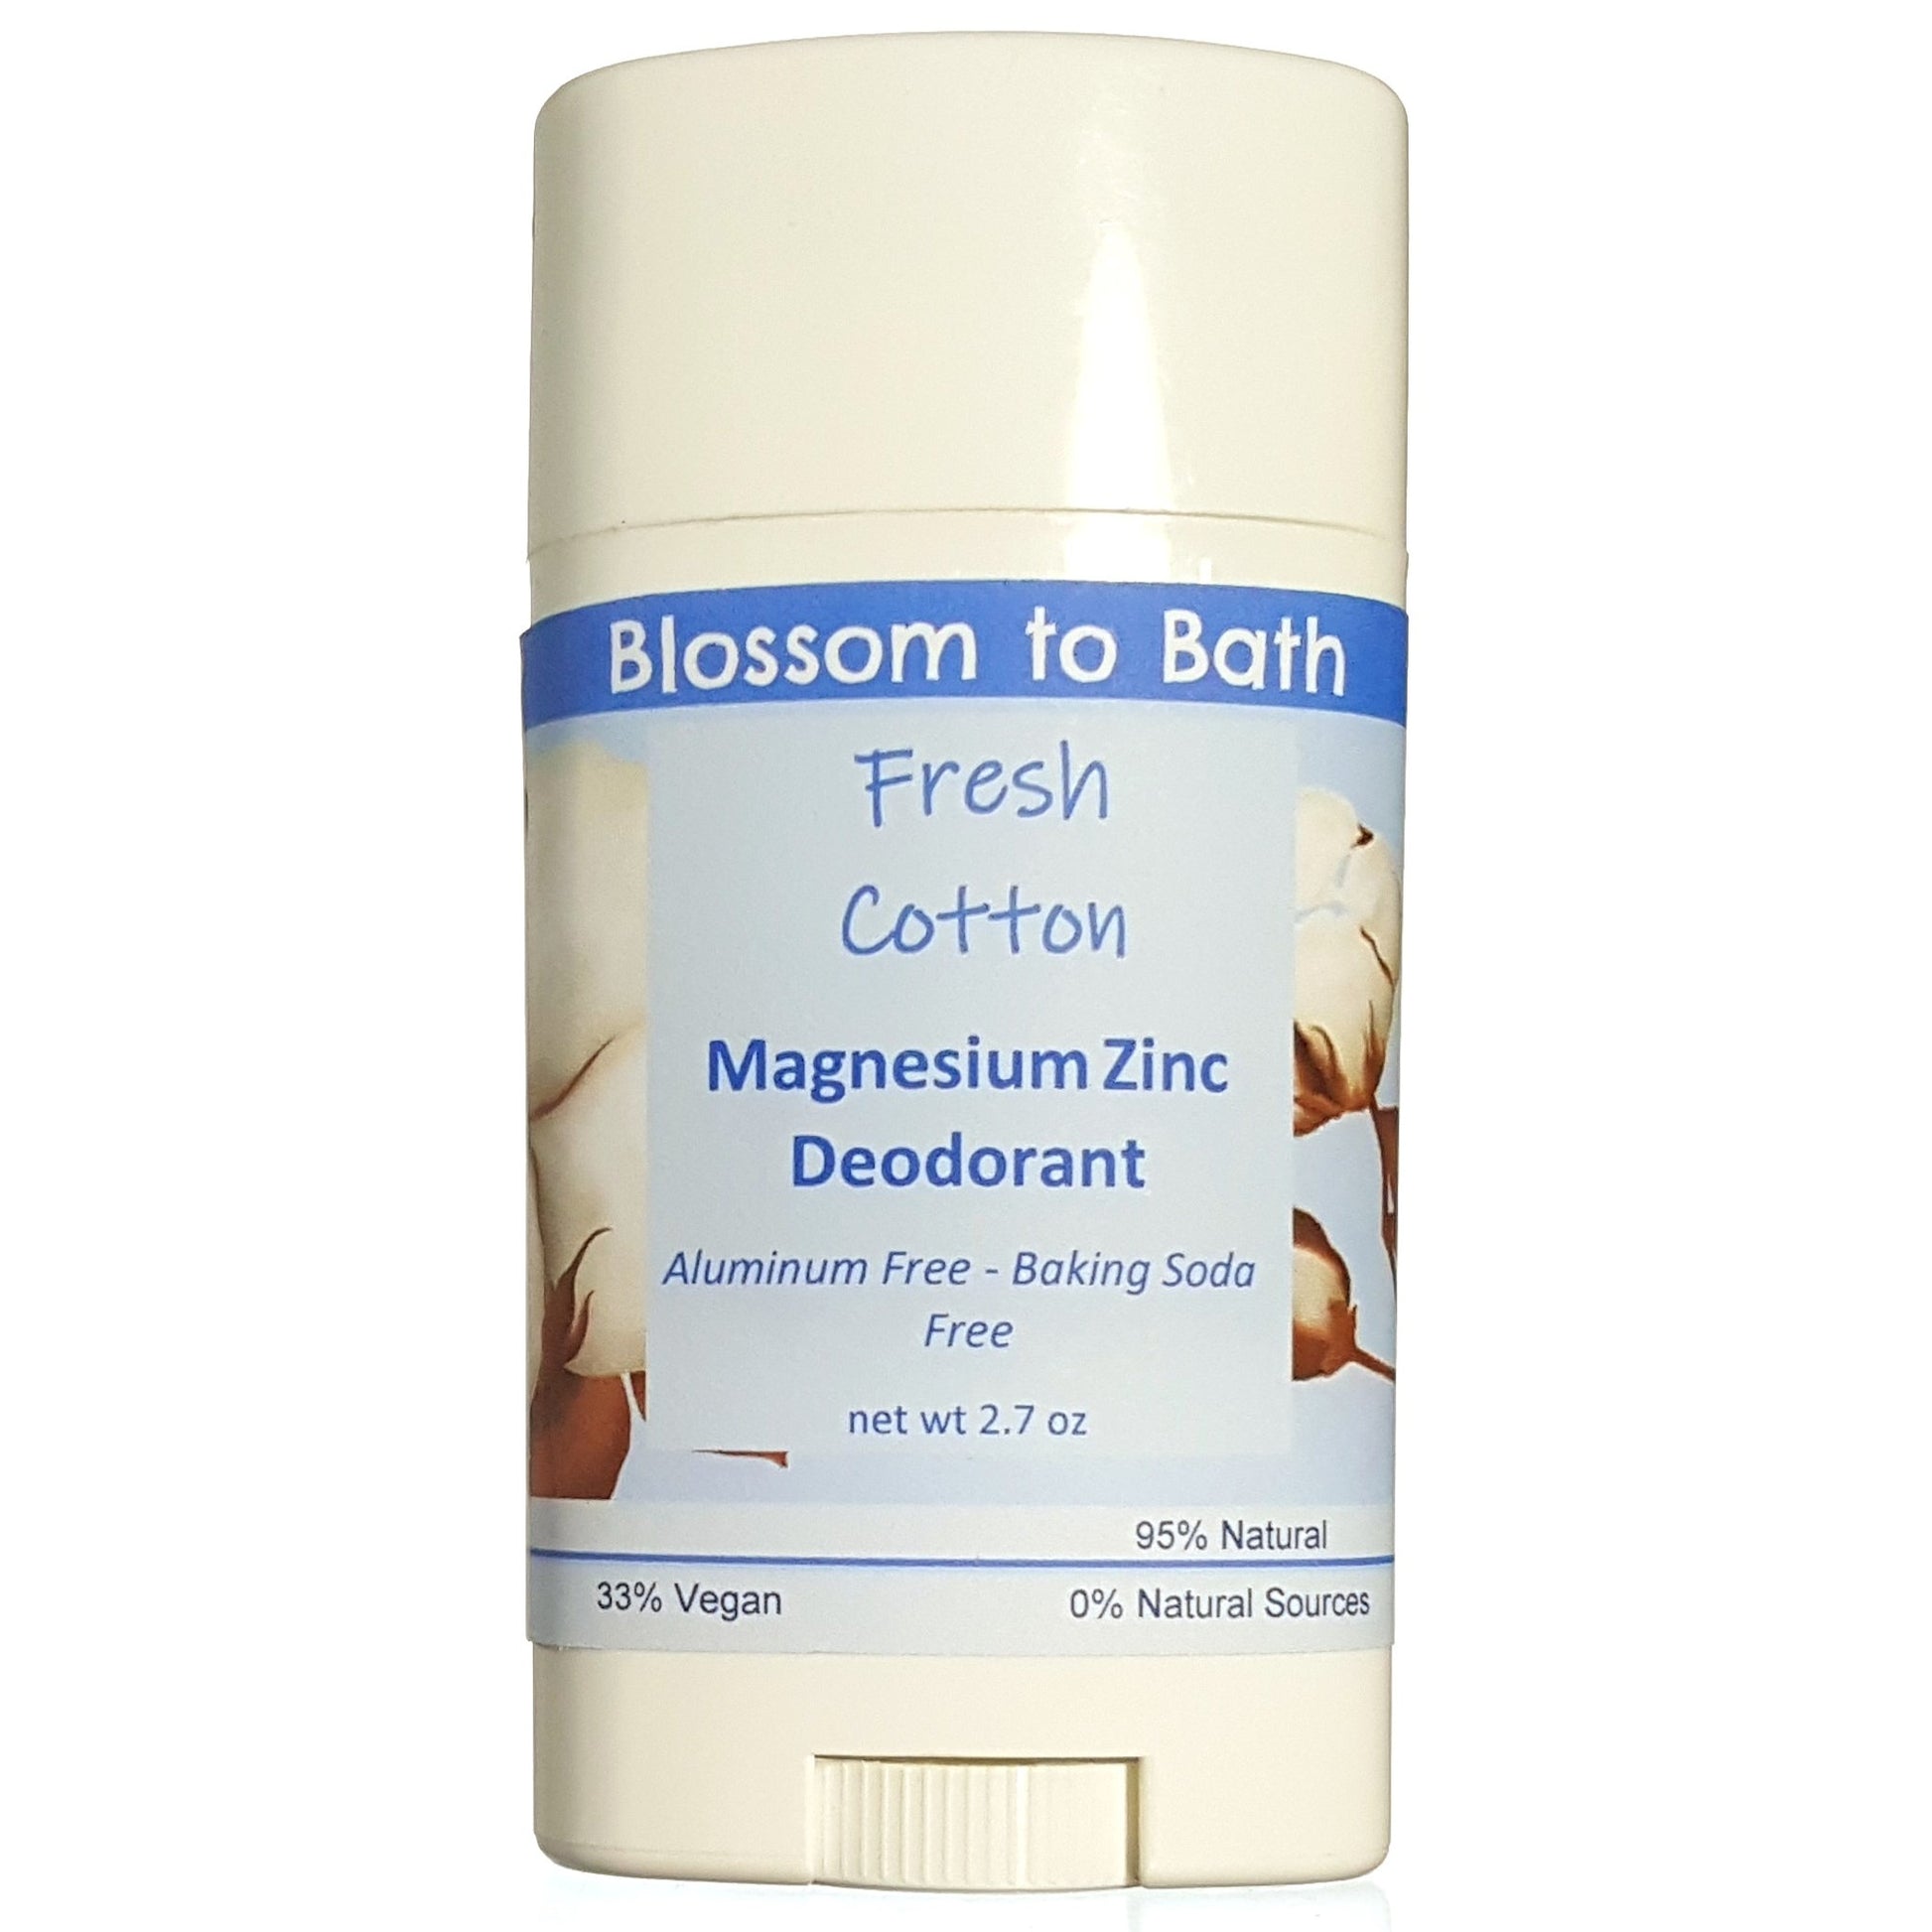 Buy Blossom to Bath Fresh Cotton Magnesium Zinc Deodorant from Flowersong Soap Studio.  Long lasting protection made from organic botanicals and butters, made without baking soda, tested in the Arizona heat  Smells like clean sheets drying in a breeze of spring blossoms.